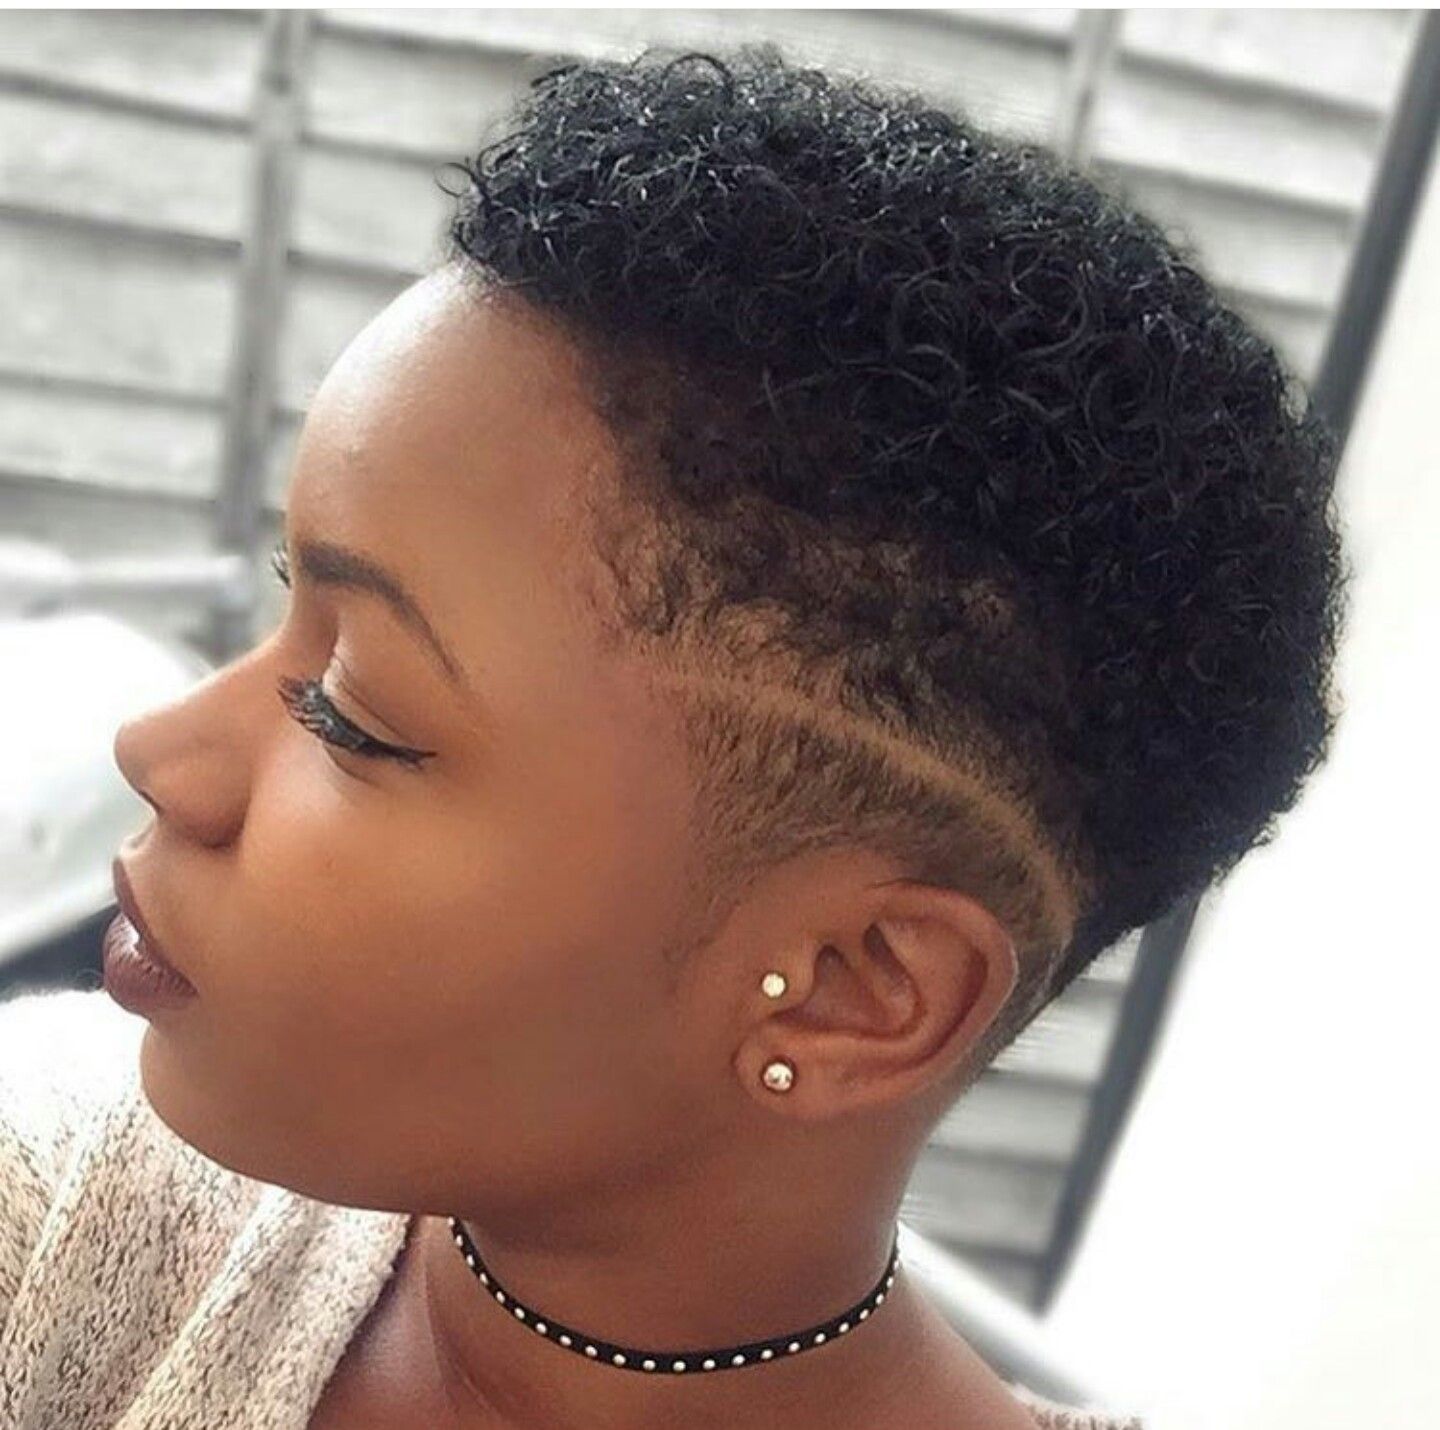 African haircuts (With images) | Tapered hair, Twa hairstyles